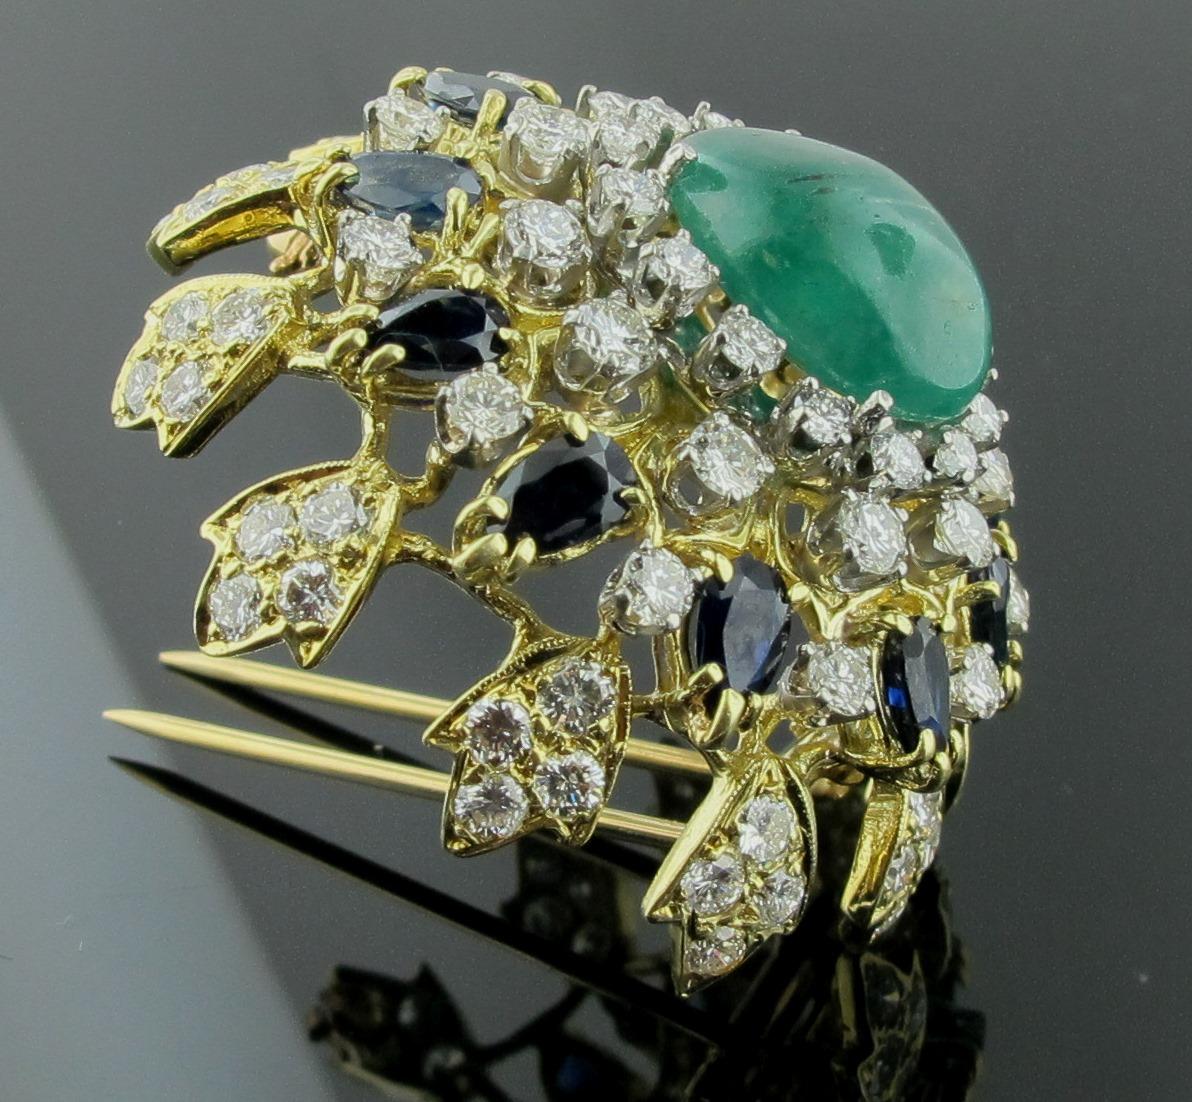 Women's or Men's 18 Karat Yellow Gold Brooch with Diamonds, Sapphires and a Cab Emerald Center For Sale